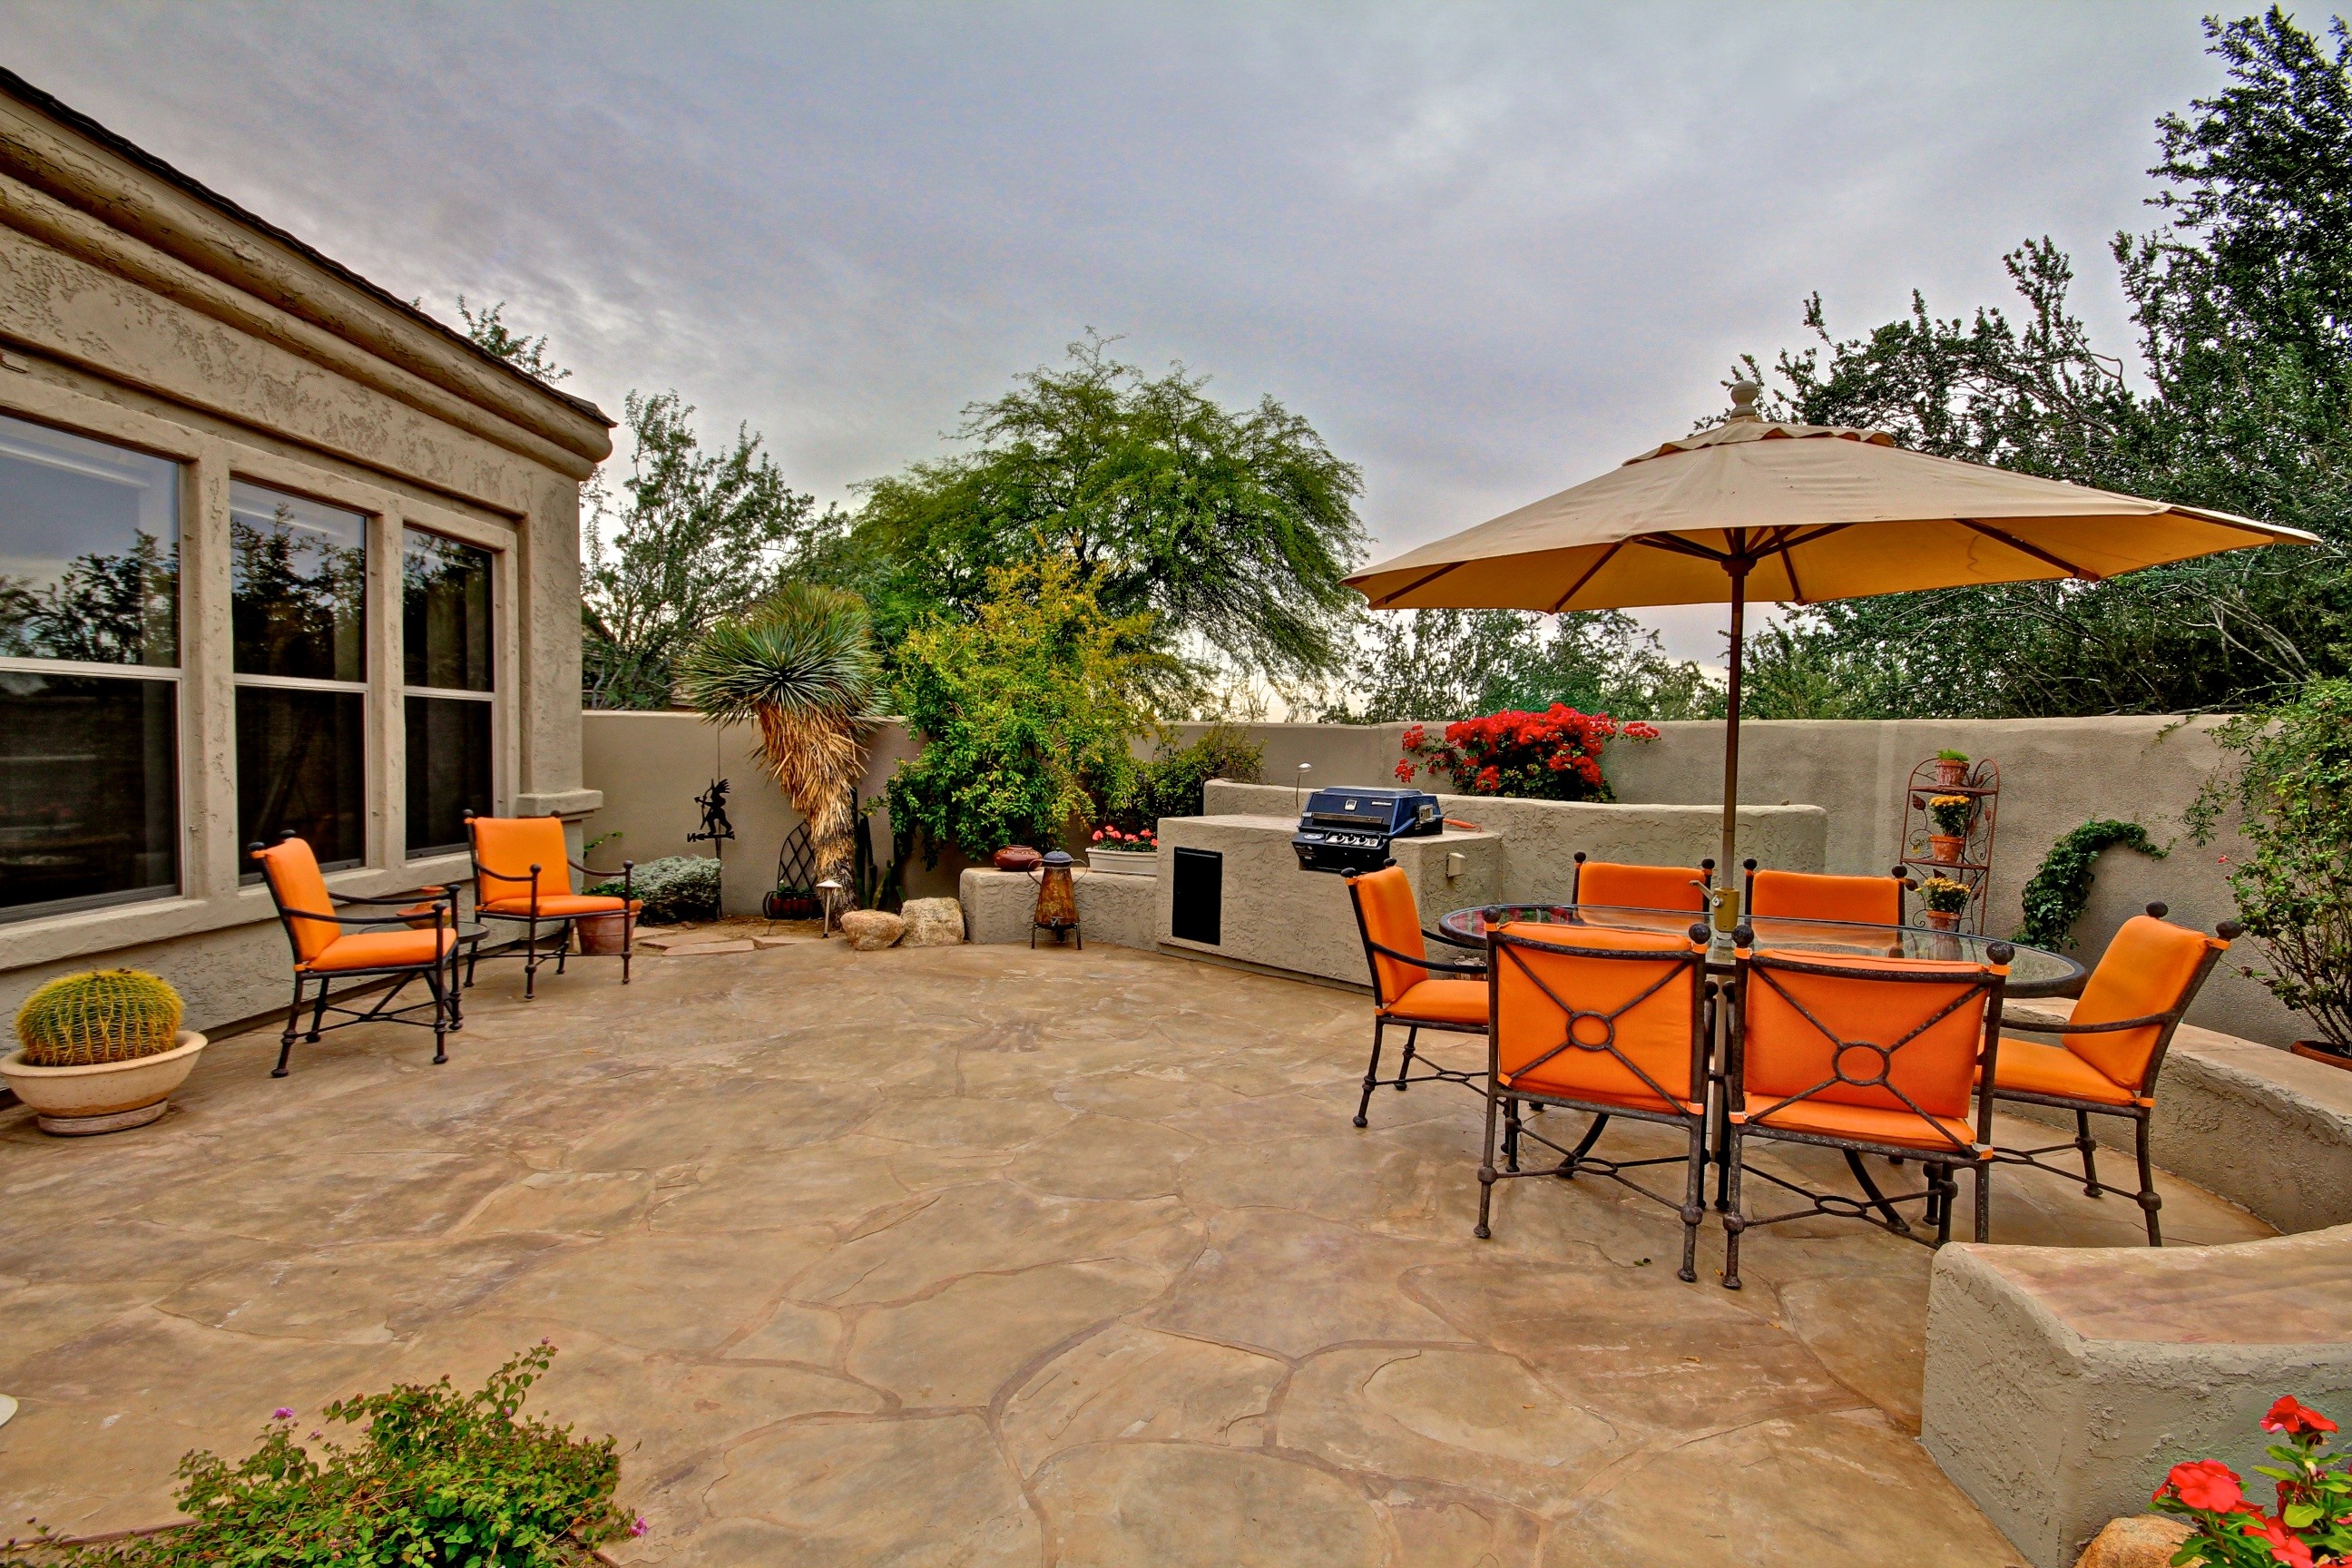 Patio and built-in BBQ at this Scottsdale home for sale in DC Ranch located at 20534 N 95th St Scottsdale, AZ 85255 listed by Don Matheson at The Matheson Team